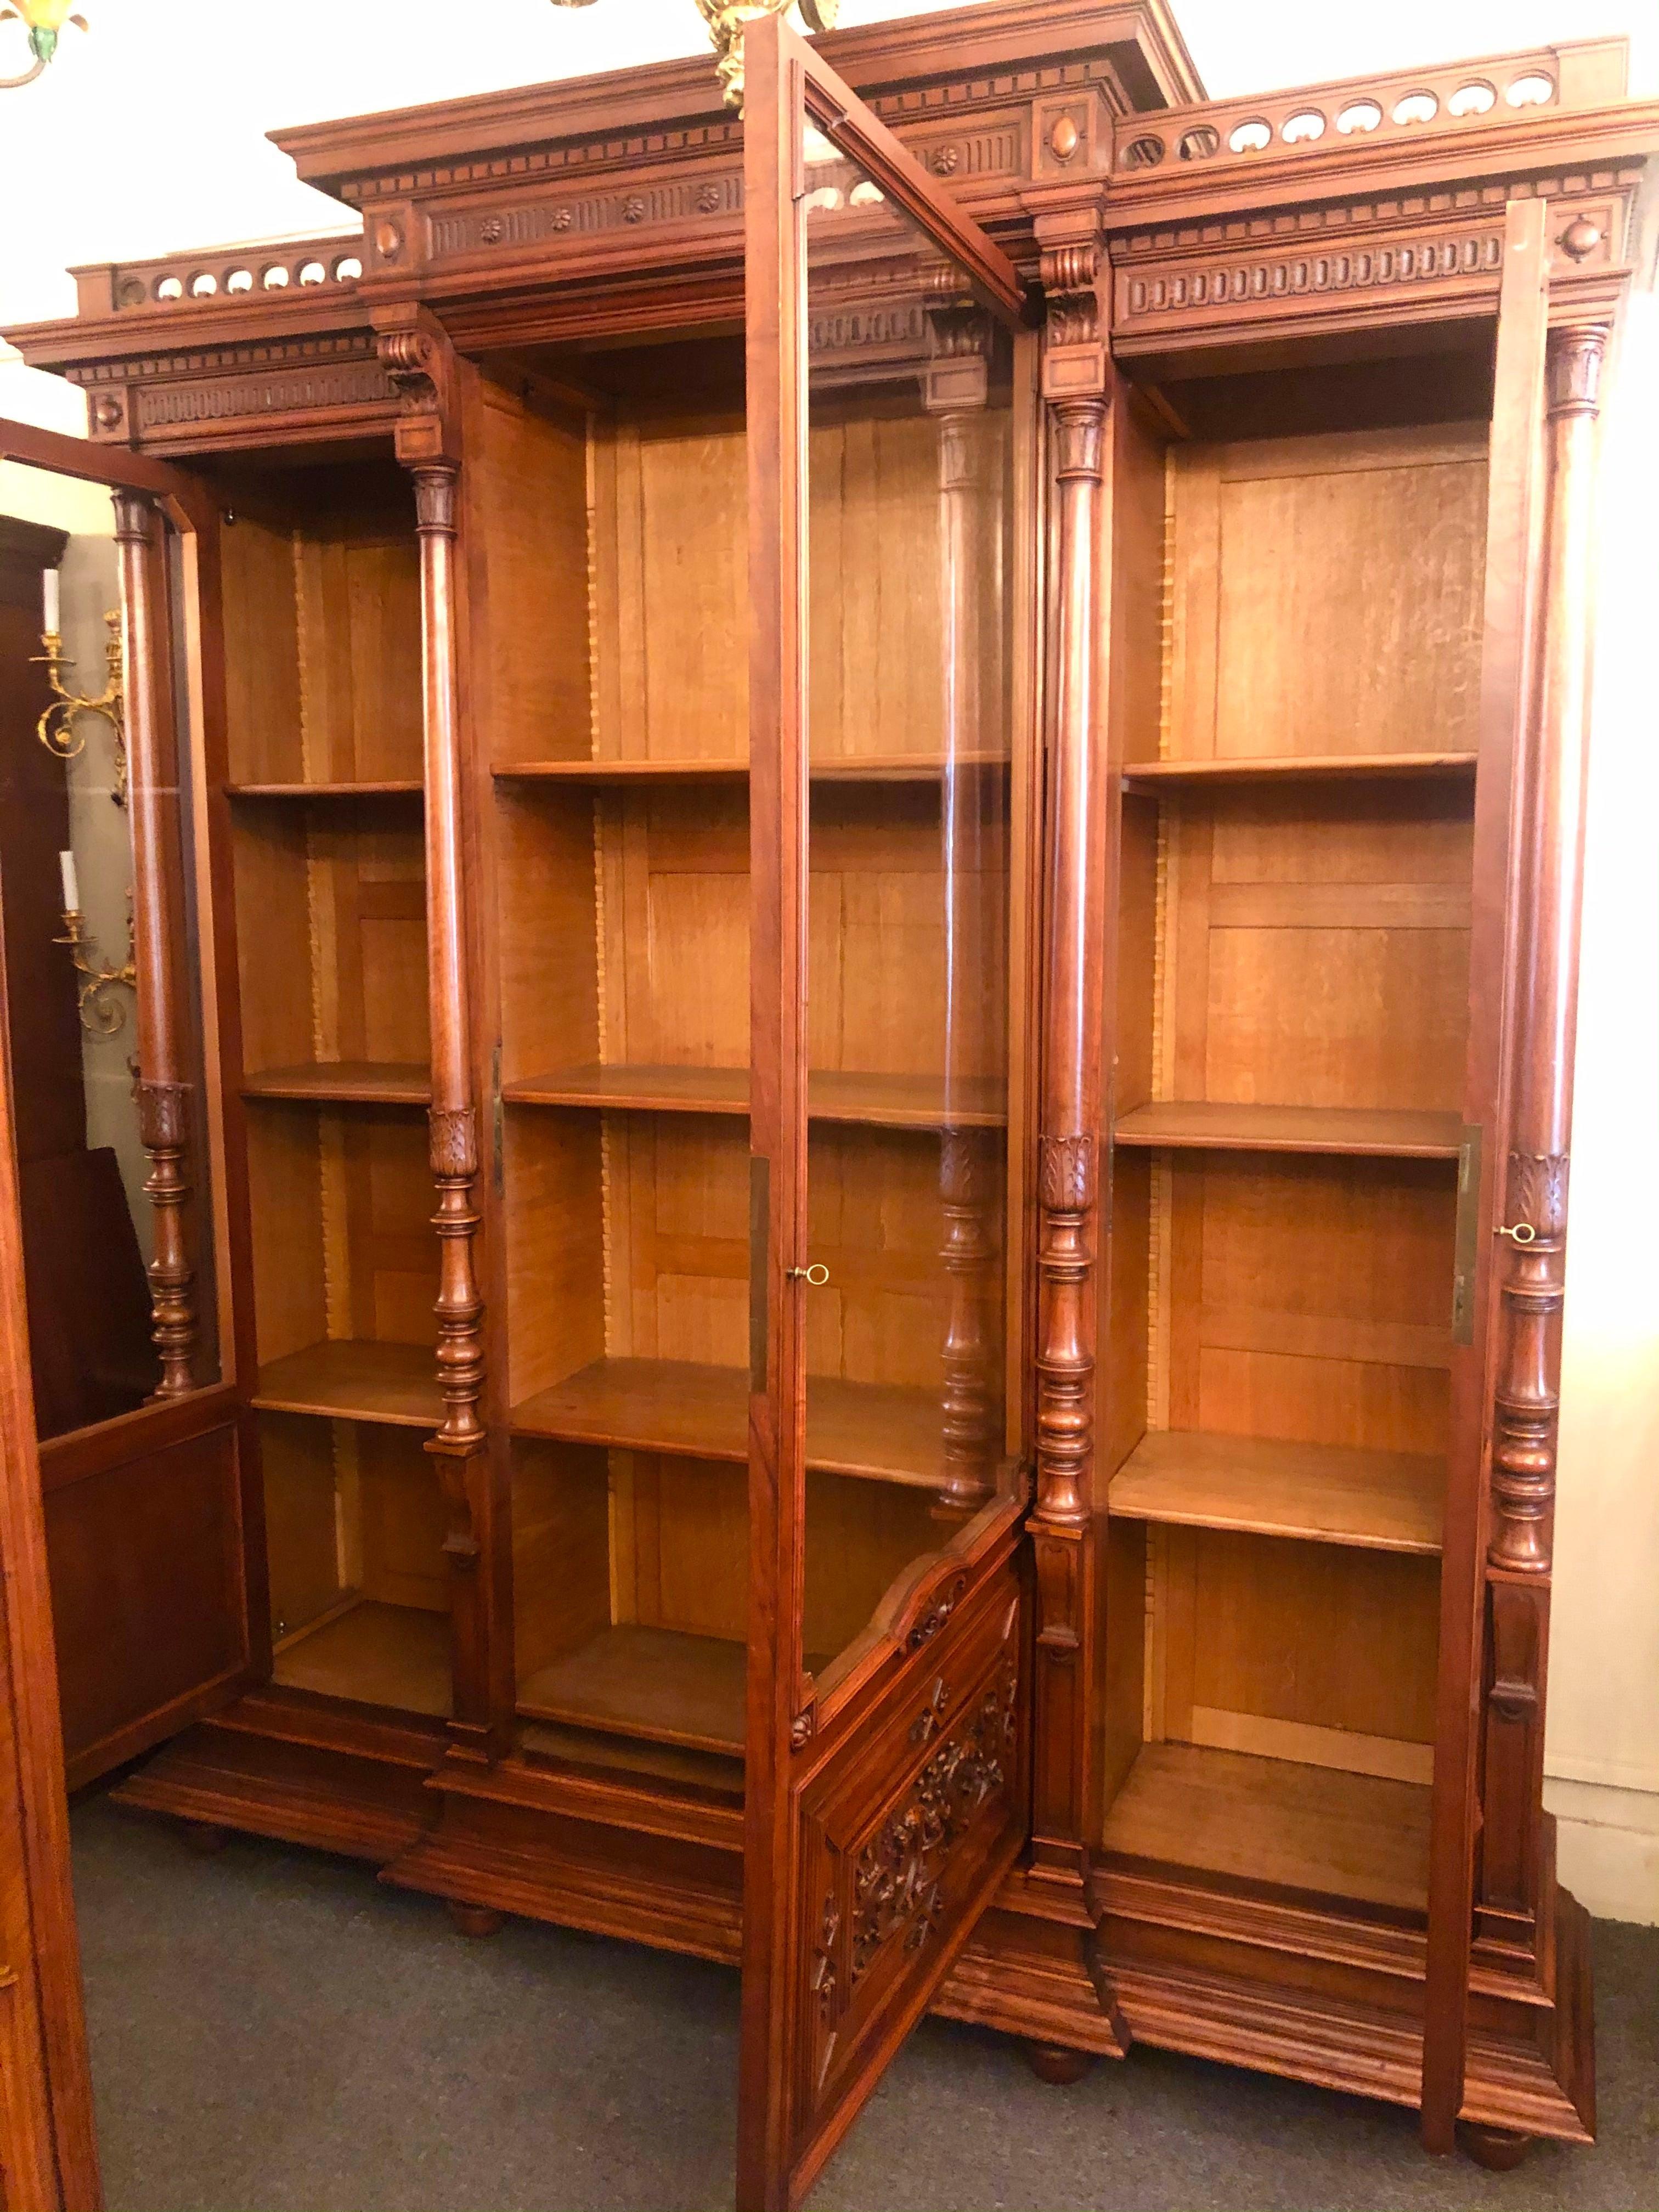 Antique French Louis Philippe carved walnut 3-door display bookcase cabinet, Circa 1880-1890.
Overall dimensions: 97